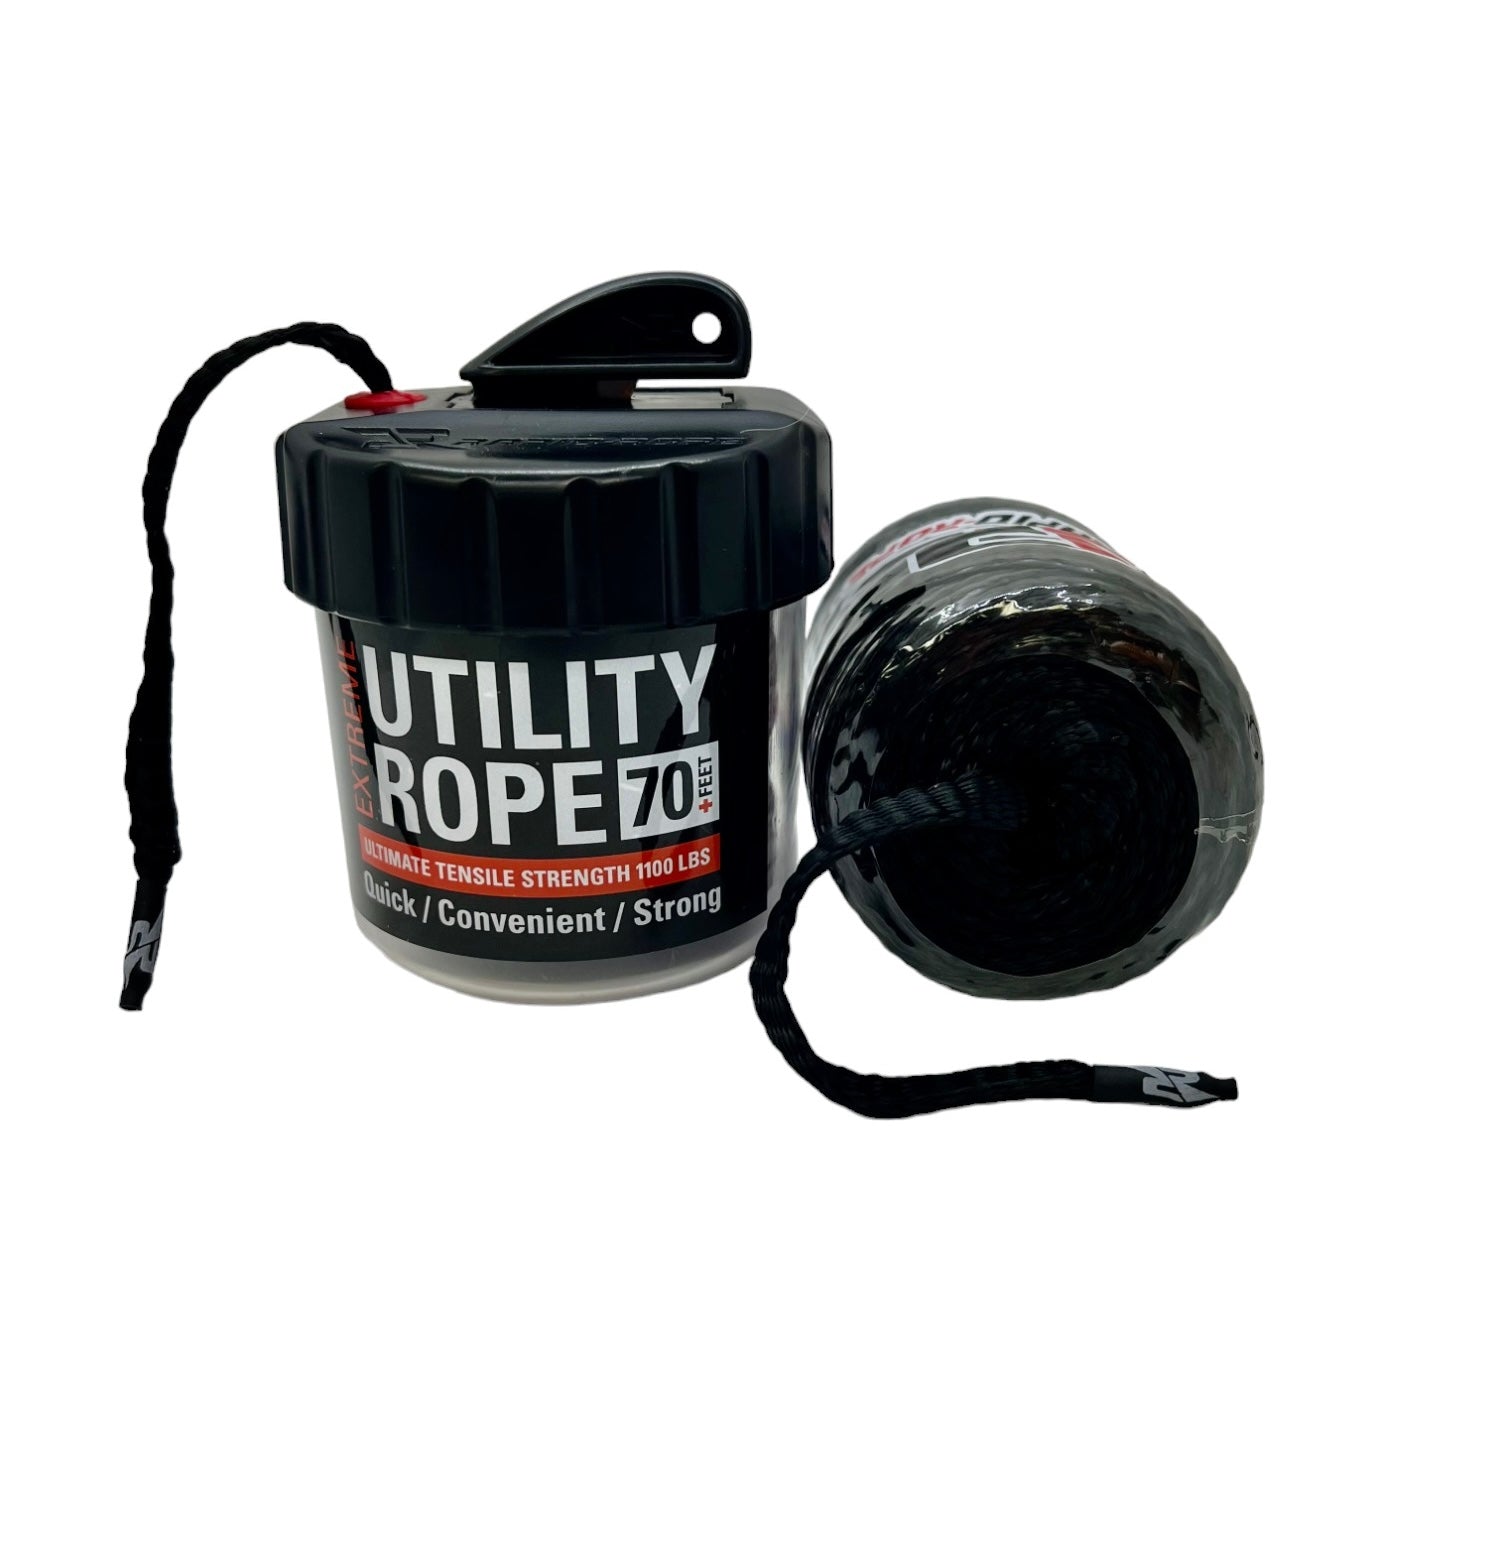 Rapid Rope Mini Canisters | Rope In a Can | 70 Feet | 1100 lb Test | USA Made!